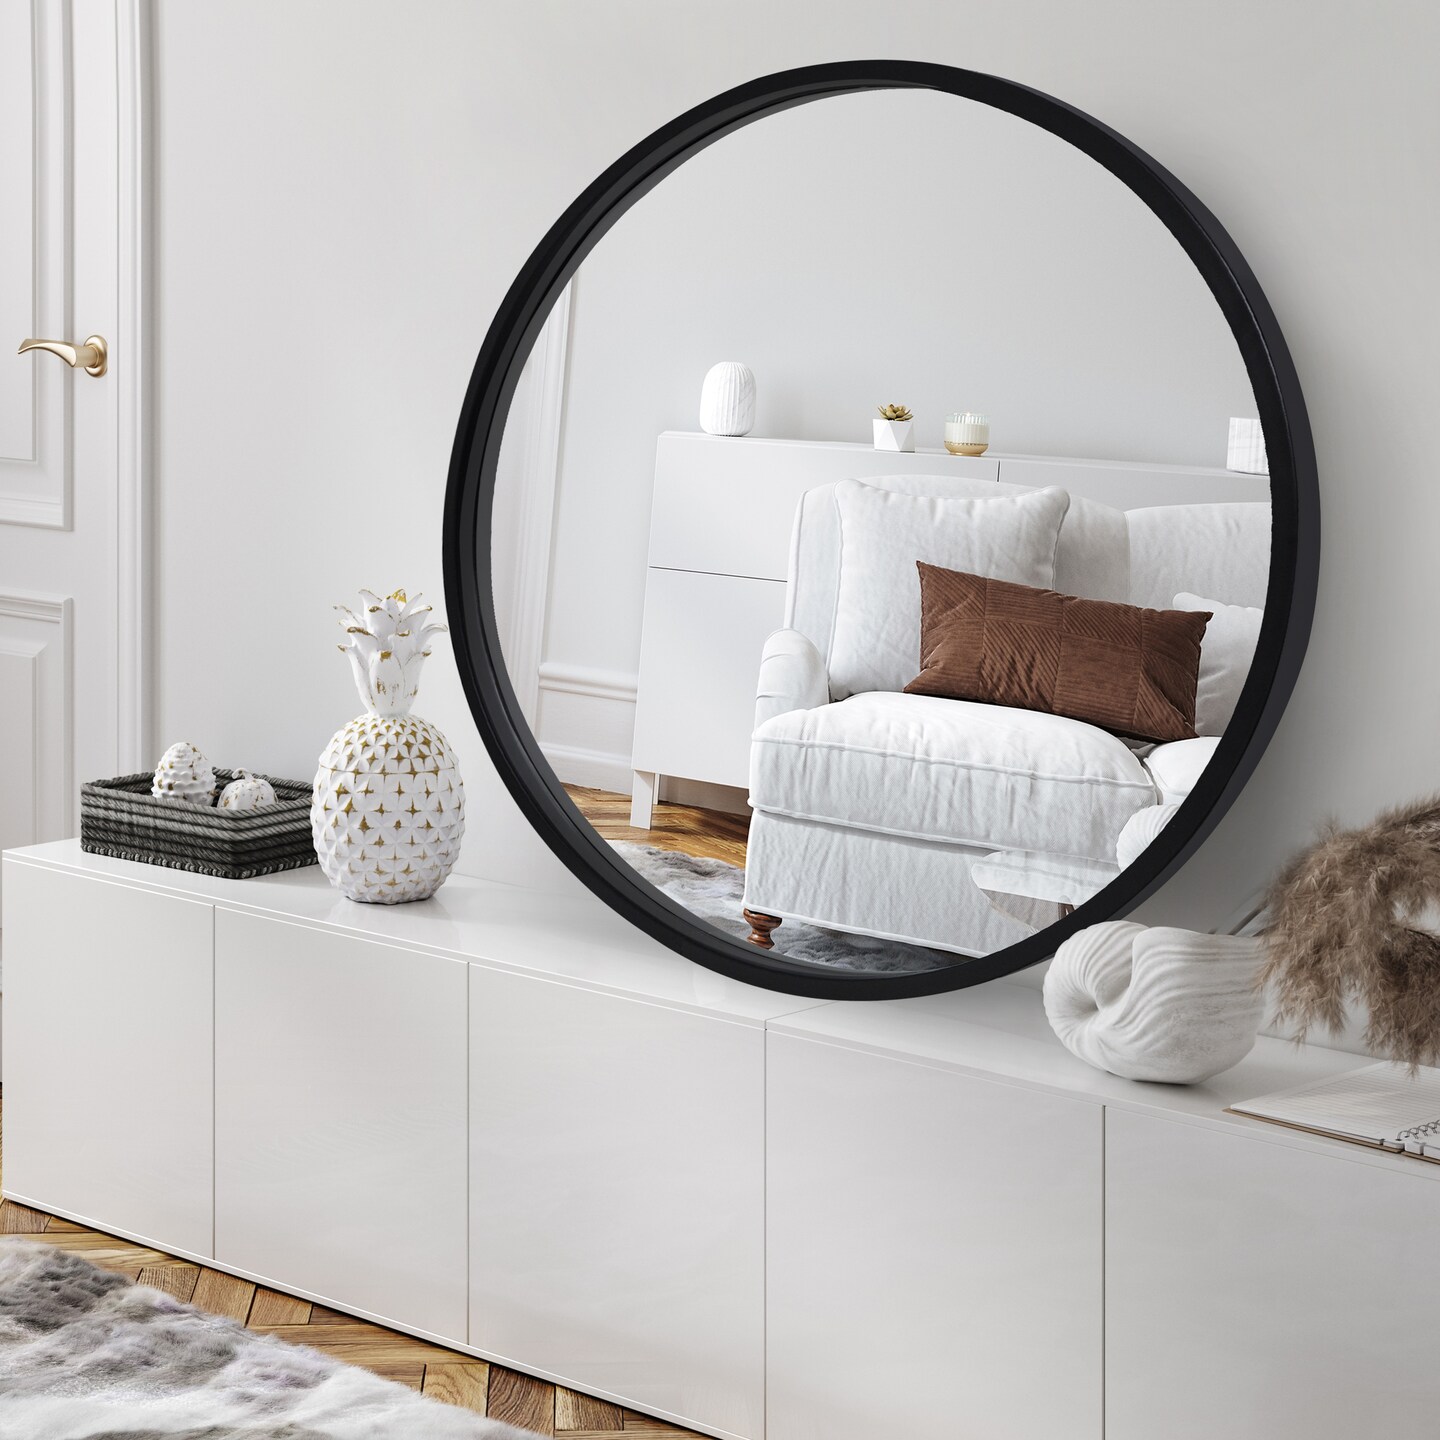 Americanflat Framed Round Mirror - Circle Mirror for Bathroom, Bedroom,  Entryway, Living Room - Large Black Circle Mirror for Wall Décor